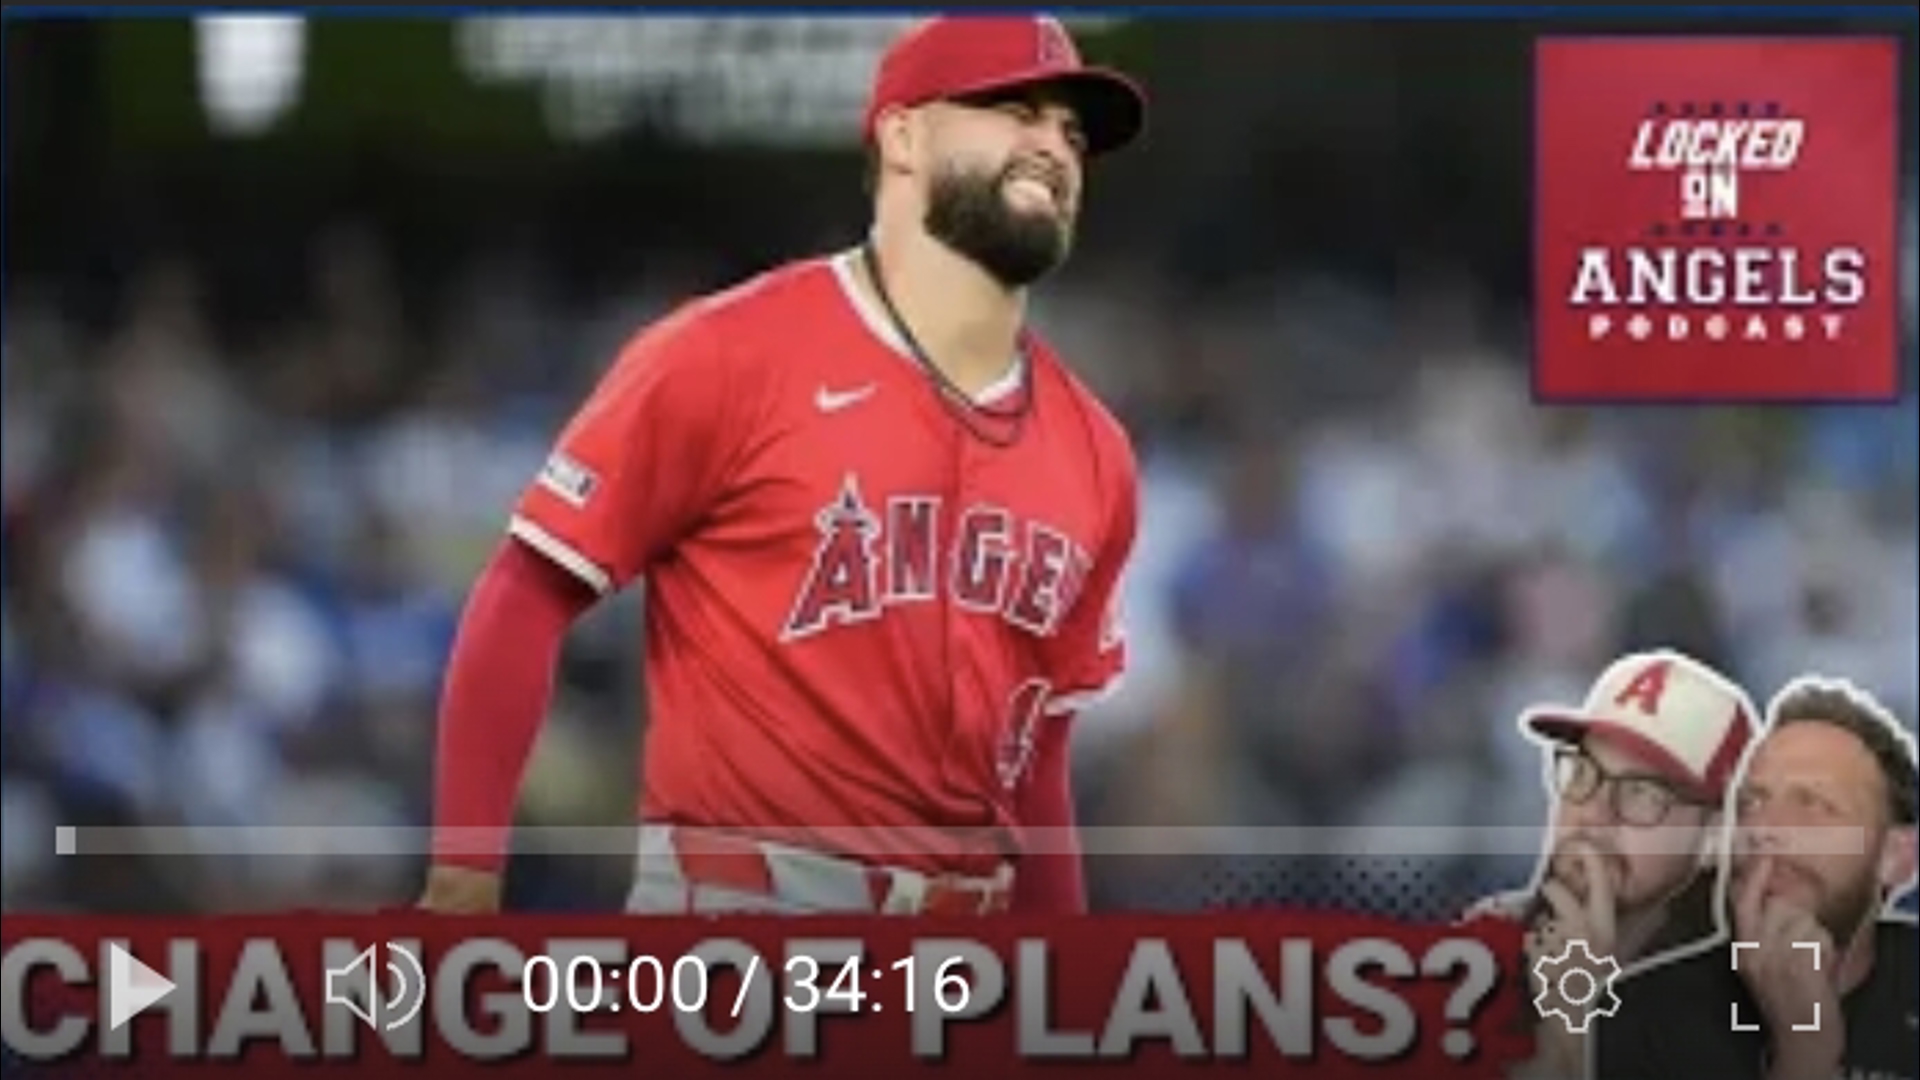 The Los Angeles Angels played a nice, clean game of baseball to get the 5-1 win over the Oakland A's on Monday night!